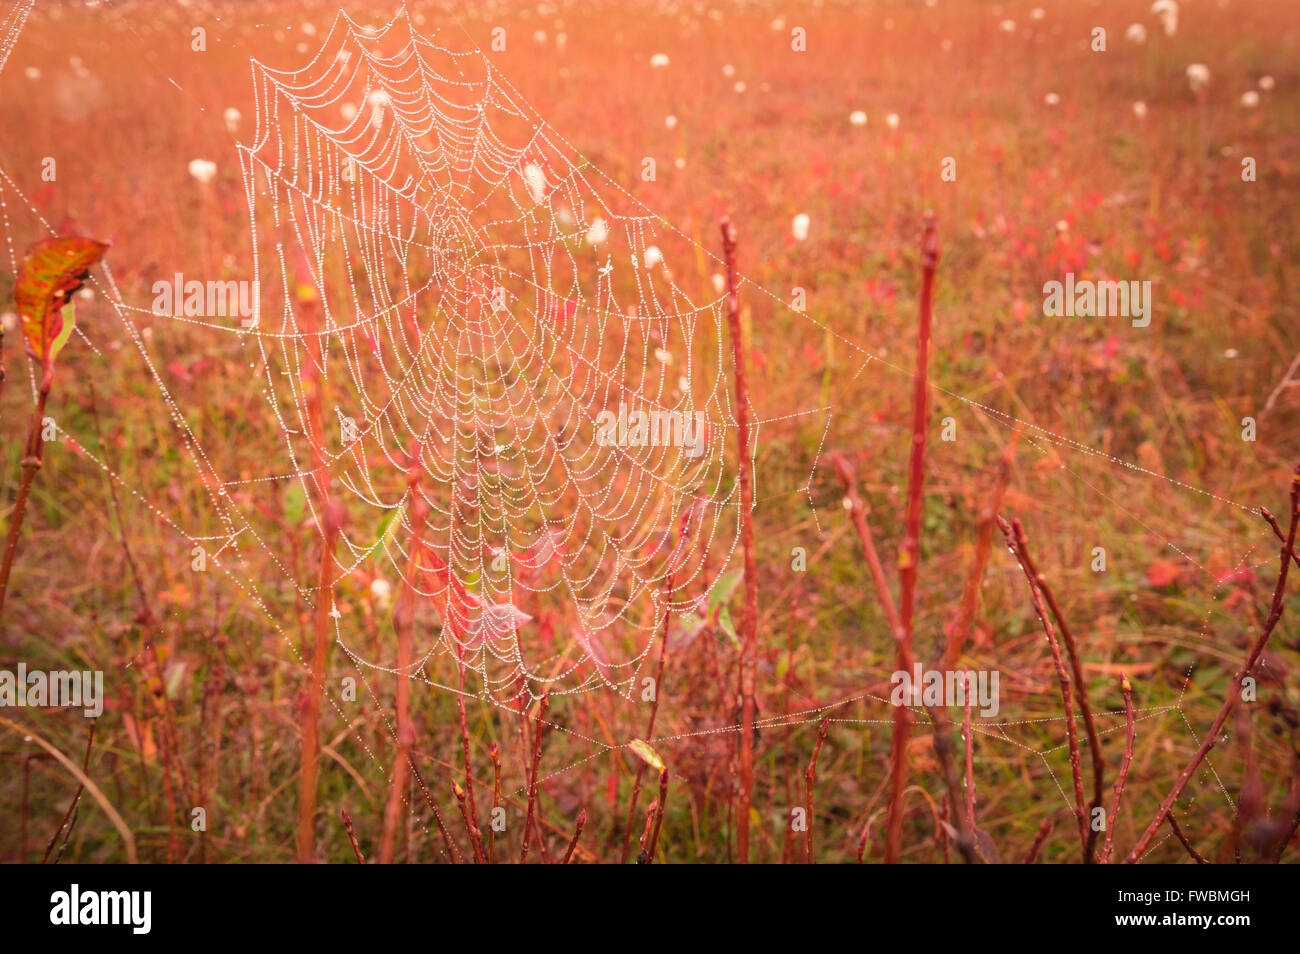 A dew laden spider web in the early morning hours at Cranberry Glades Botanical Area, West Virginia. Stock Photo